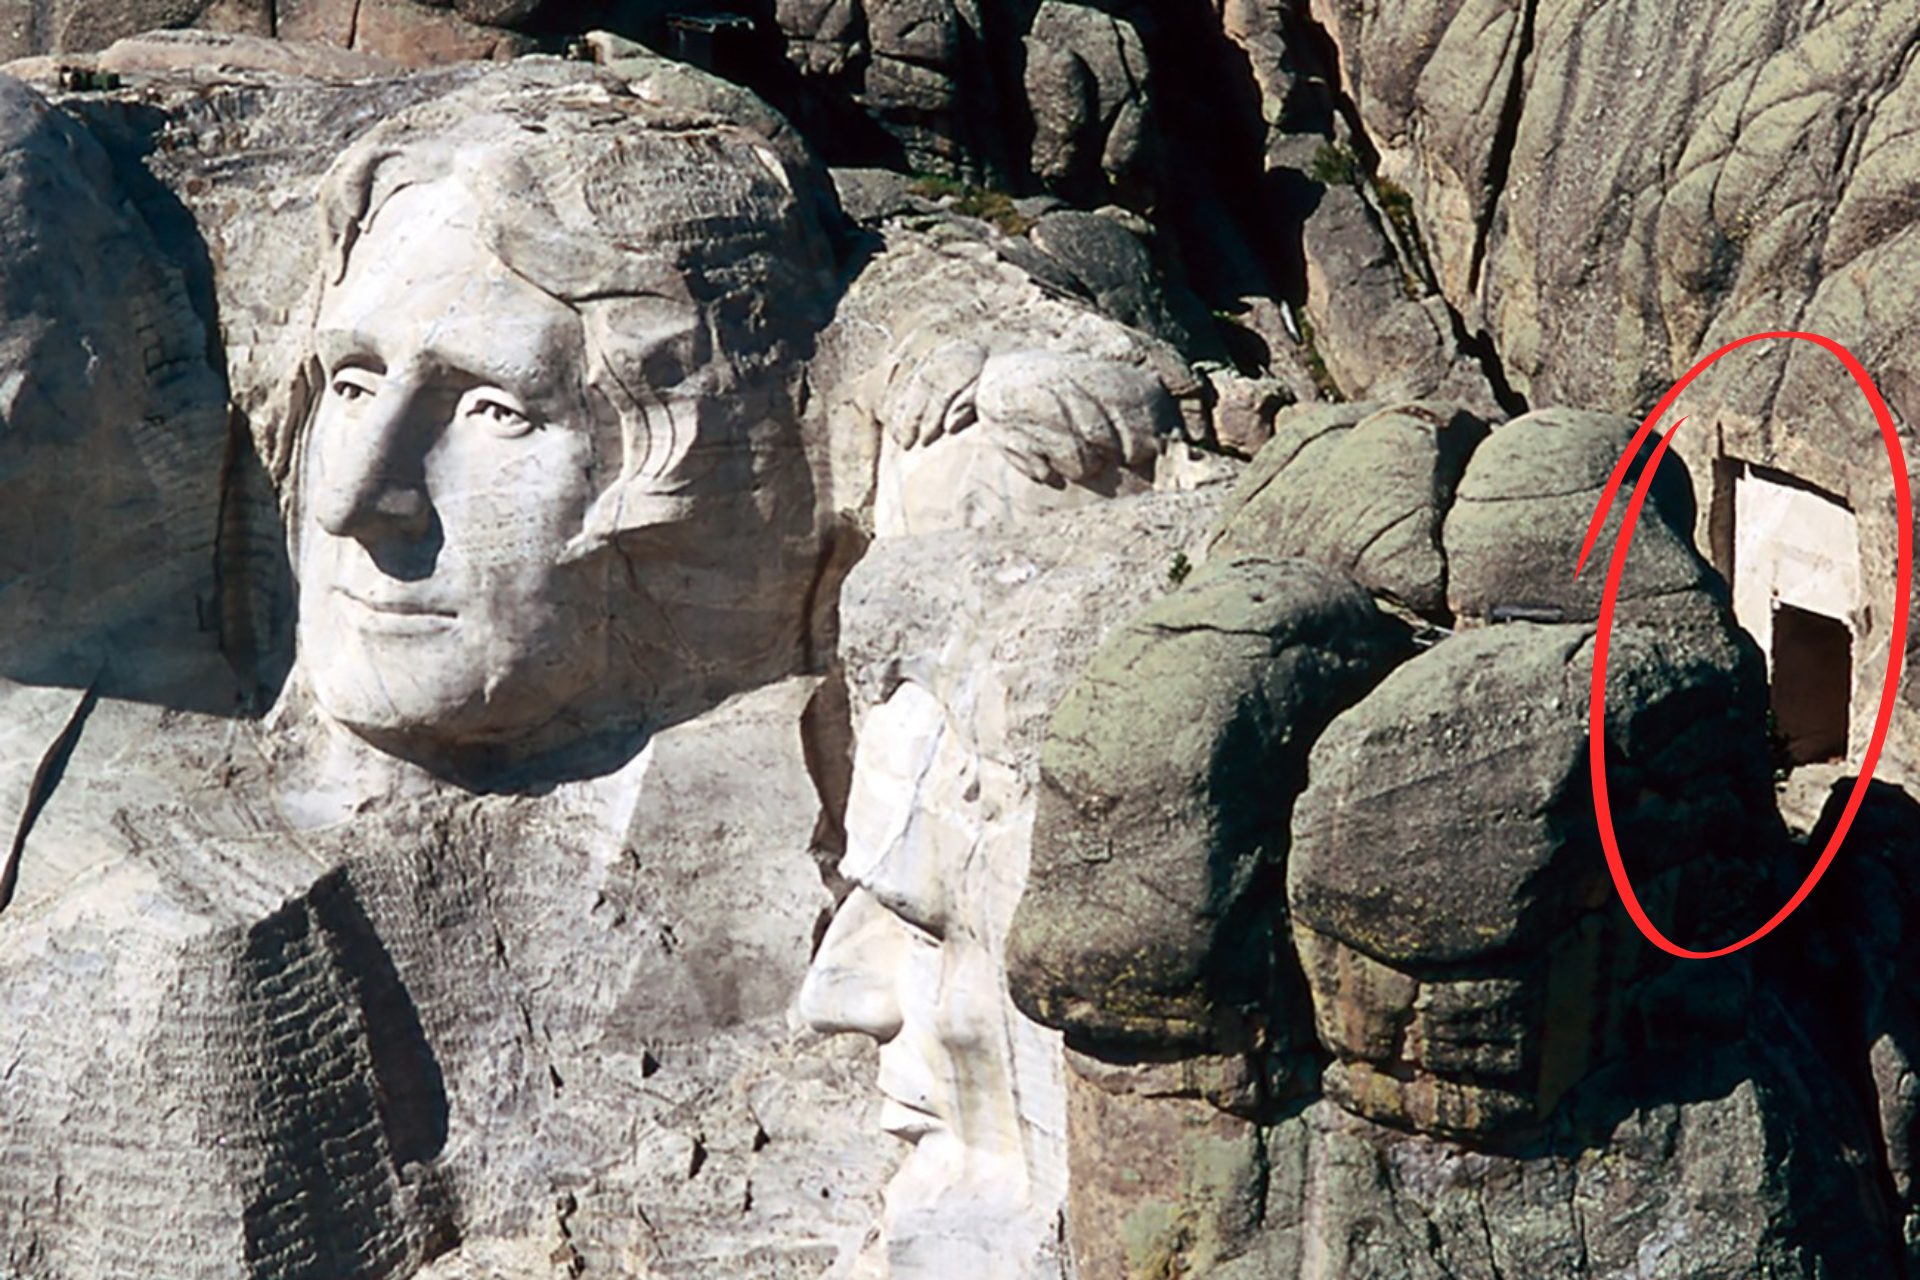 An arial photograph featuring the presidential heads at Mount Rushmore with a large rectangular opening carved into the rock behind the heads.